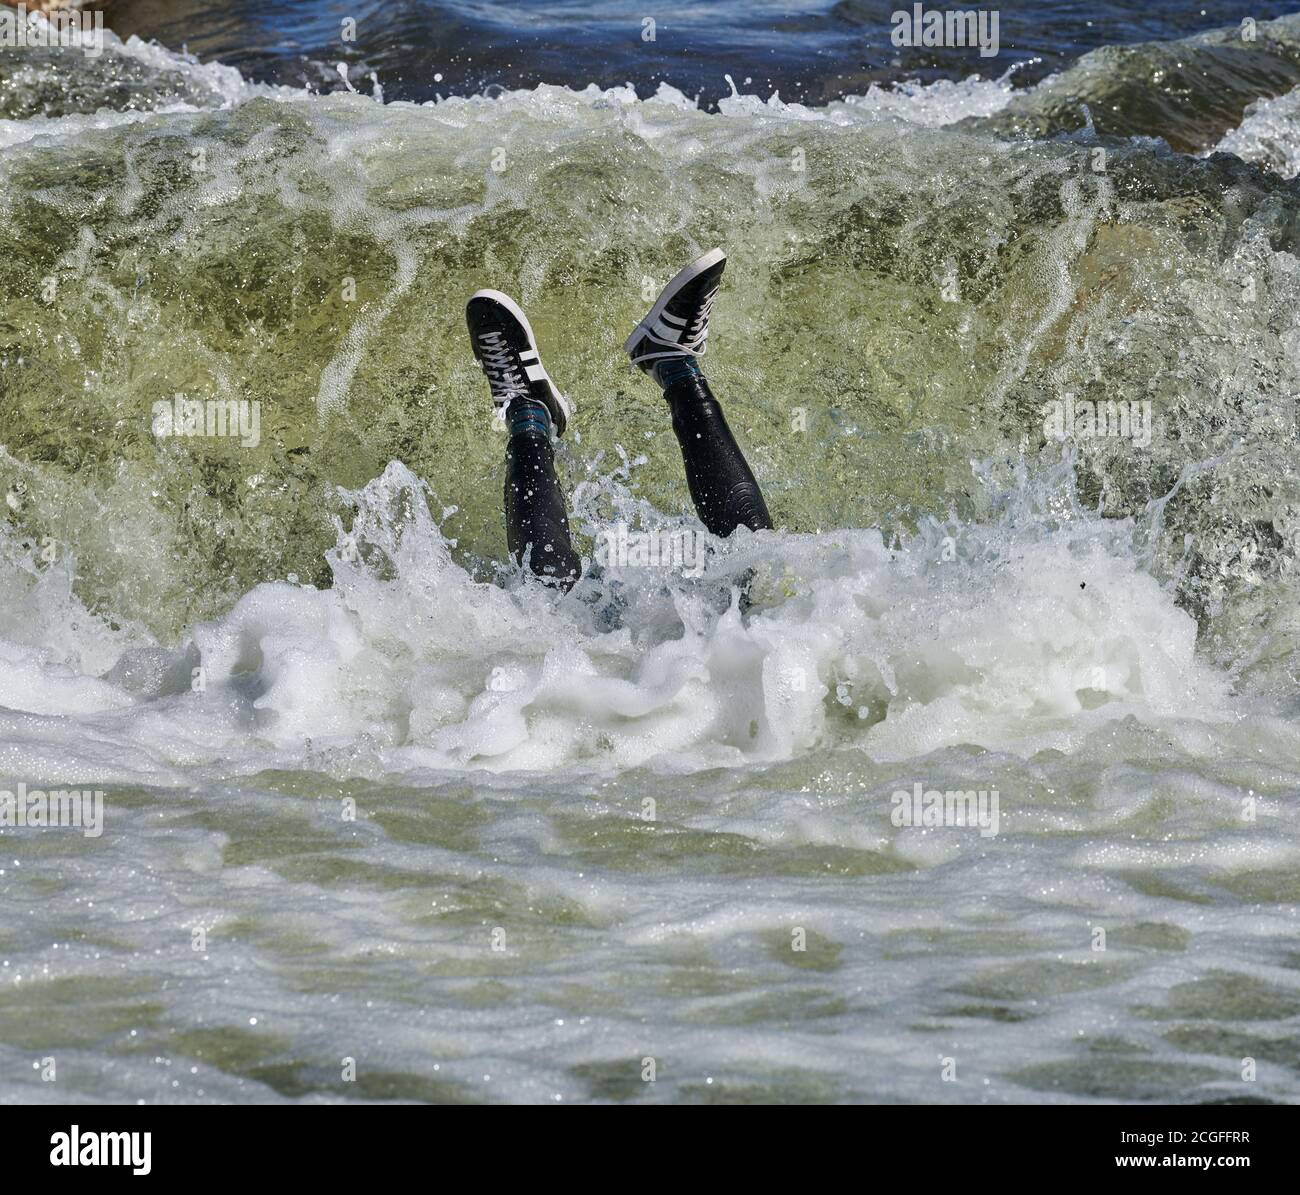 Teenage boy, with legs above water, disappears  into a stopper backwards on the artificial whitewater course at Northampton, England. Stock Photo